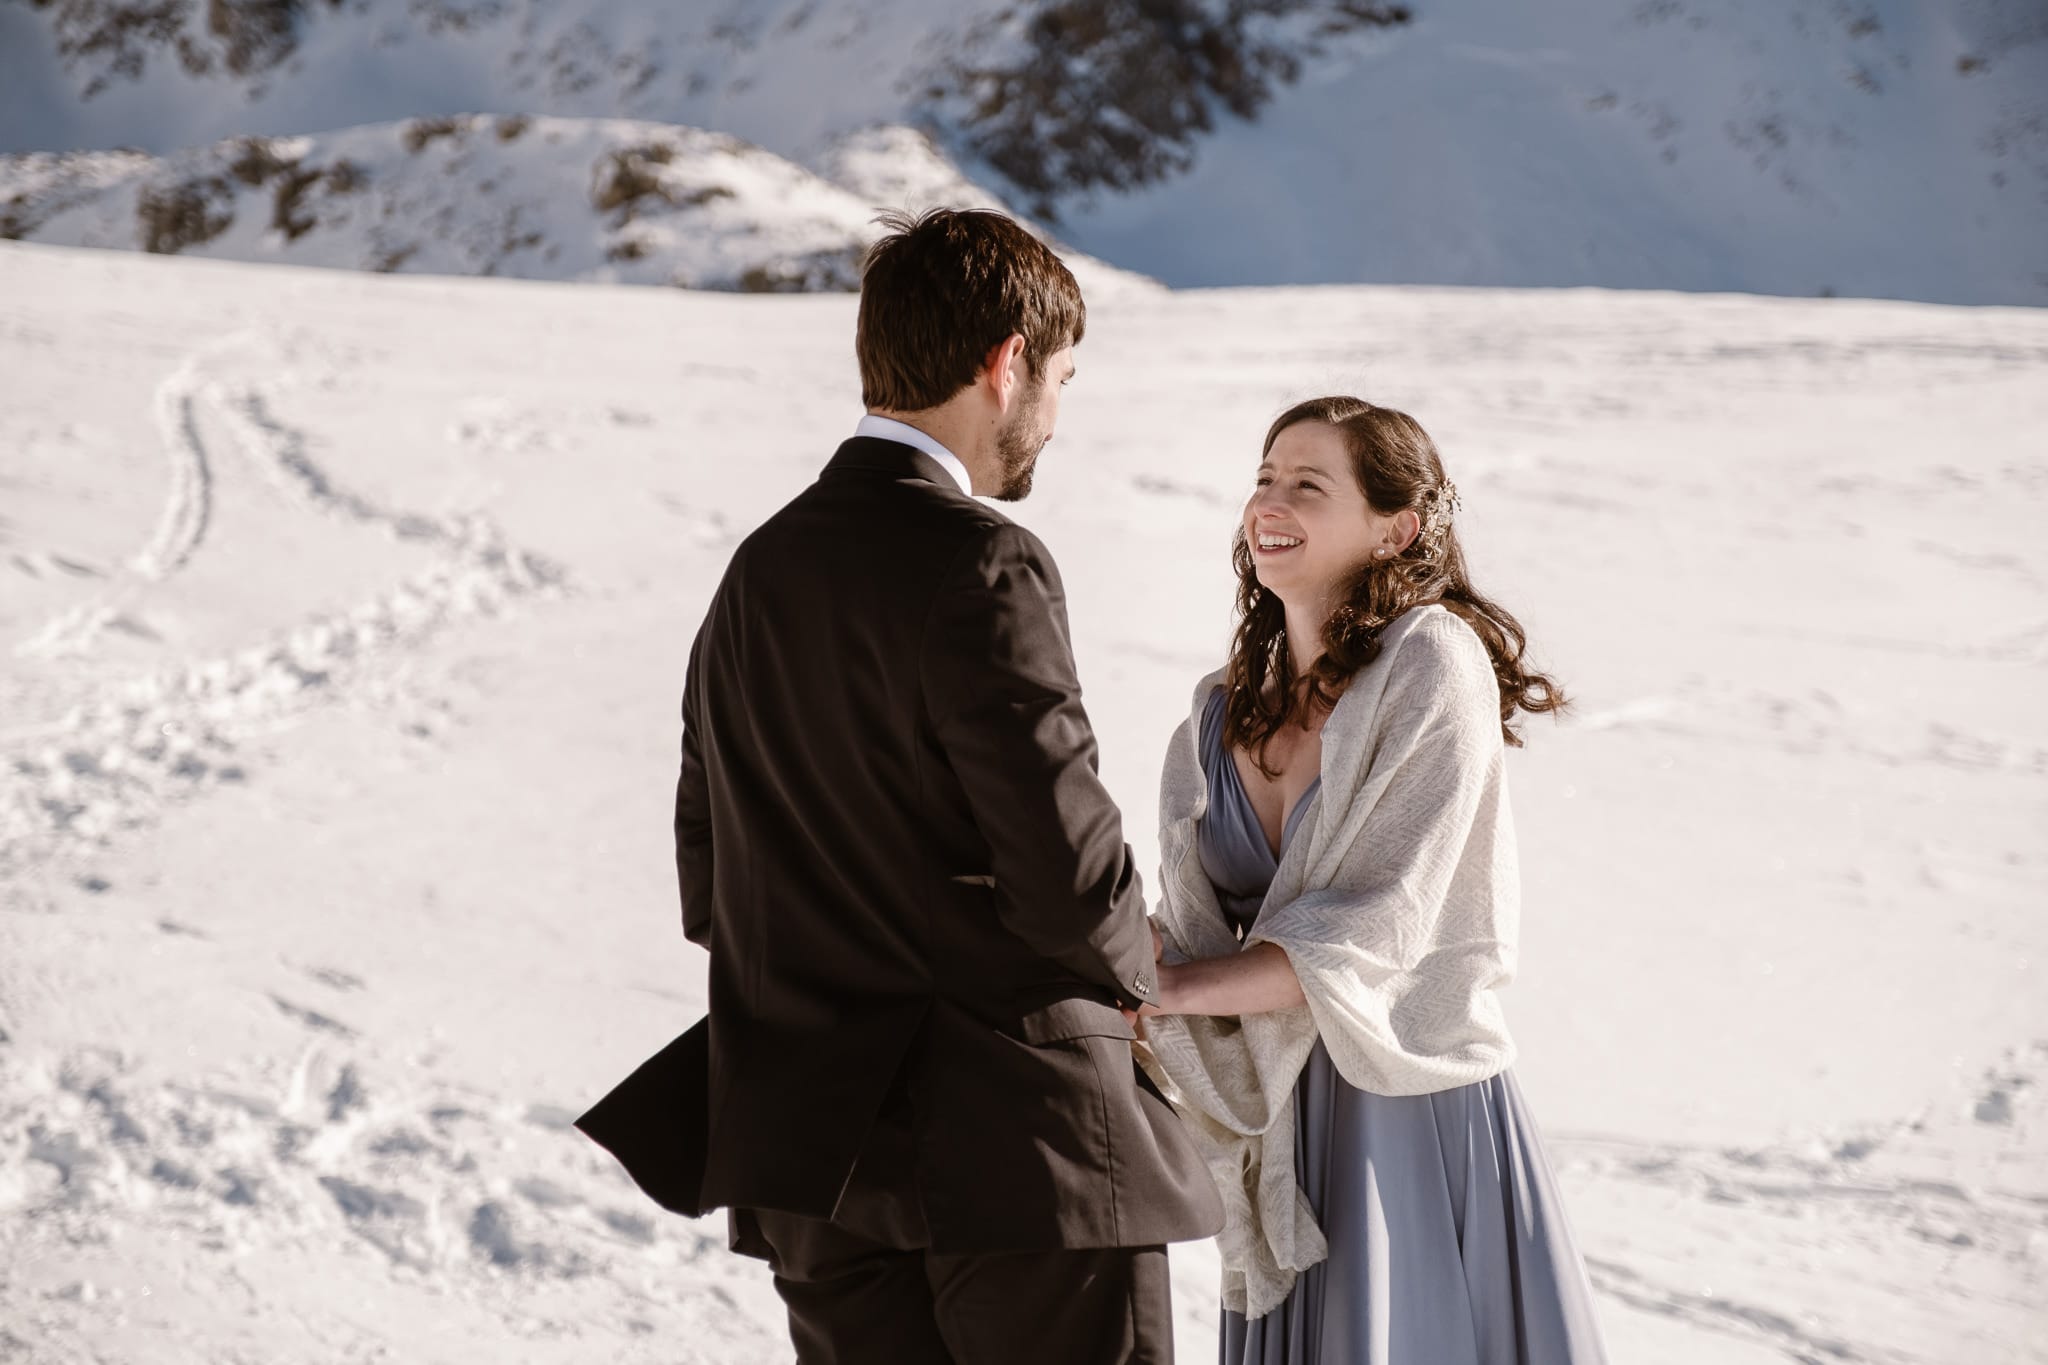 Bride and groom exchanging vows in snow covered mountains of Colorado, winter elopement photography